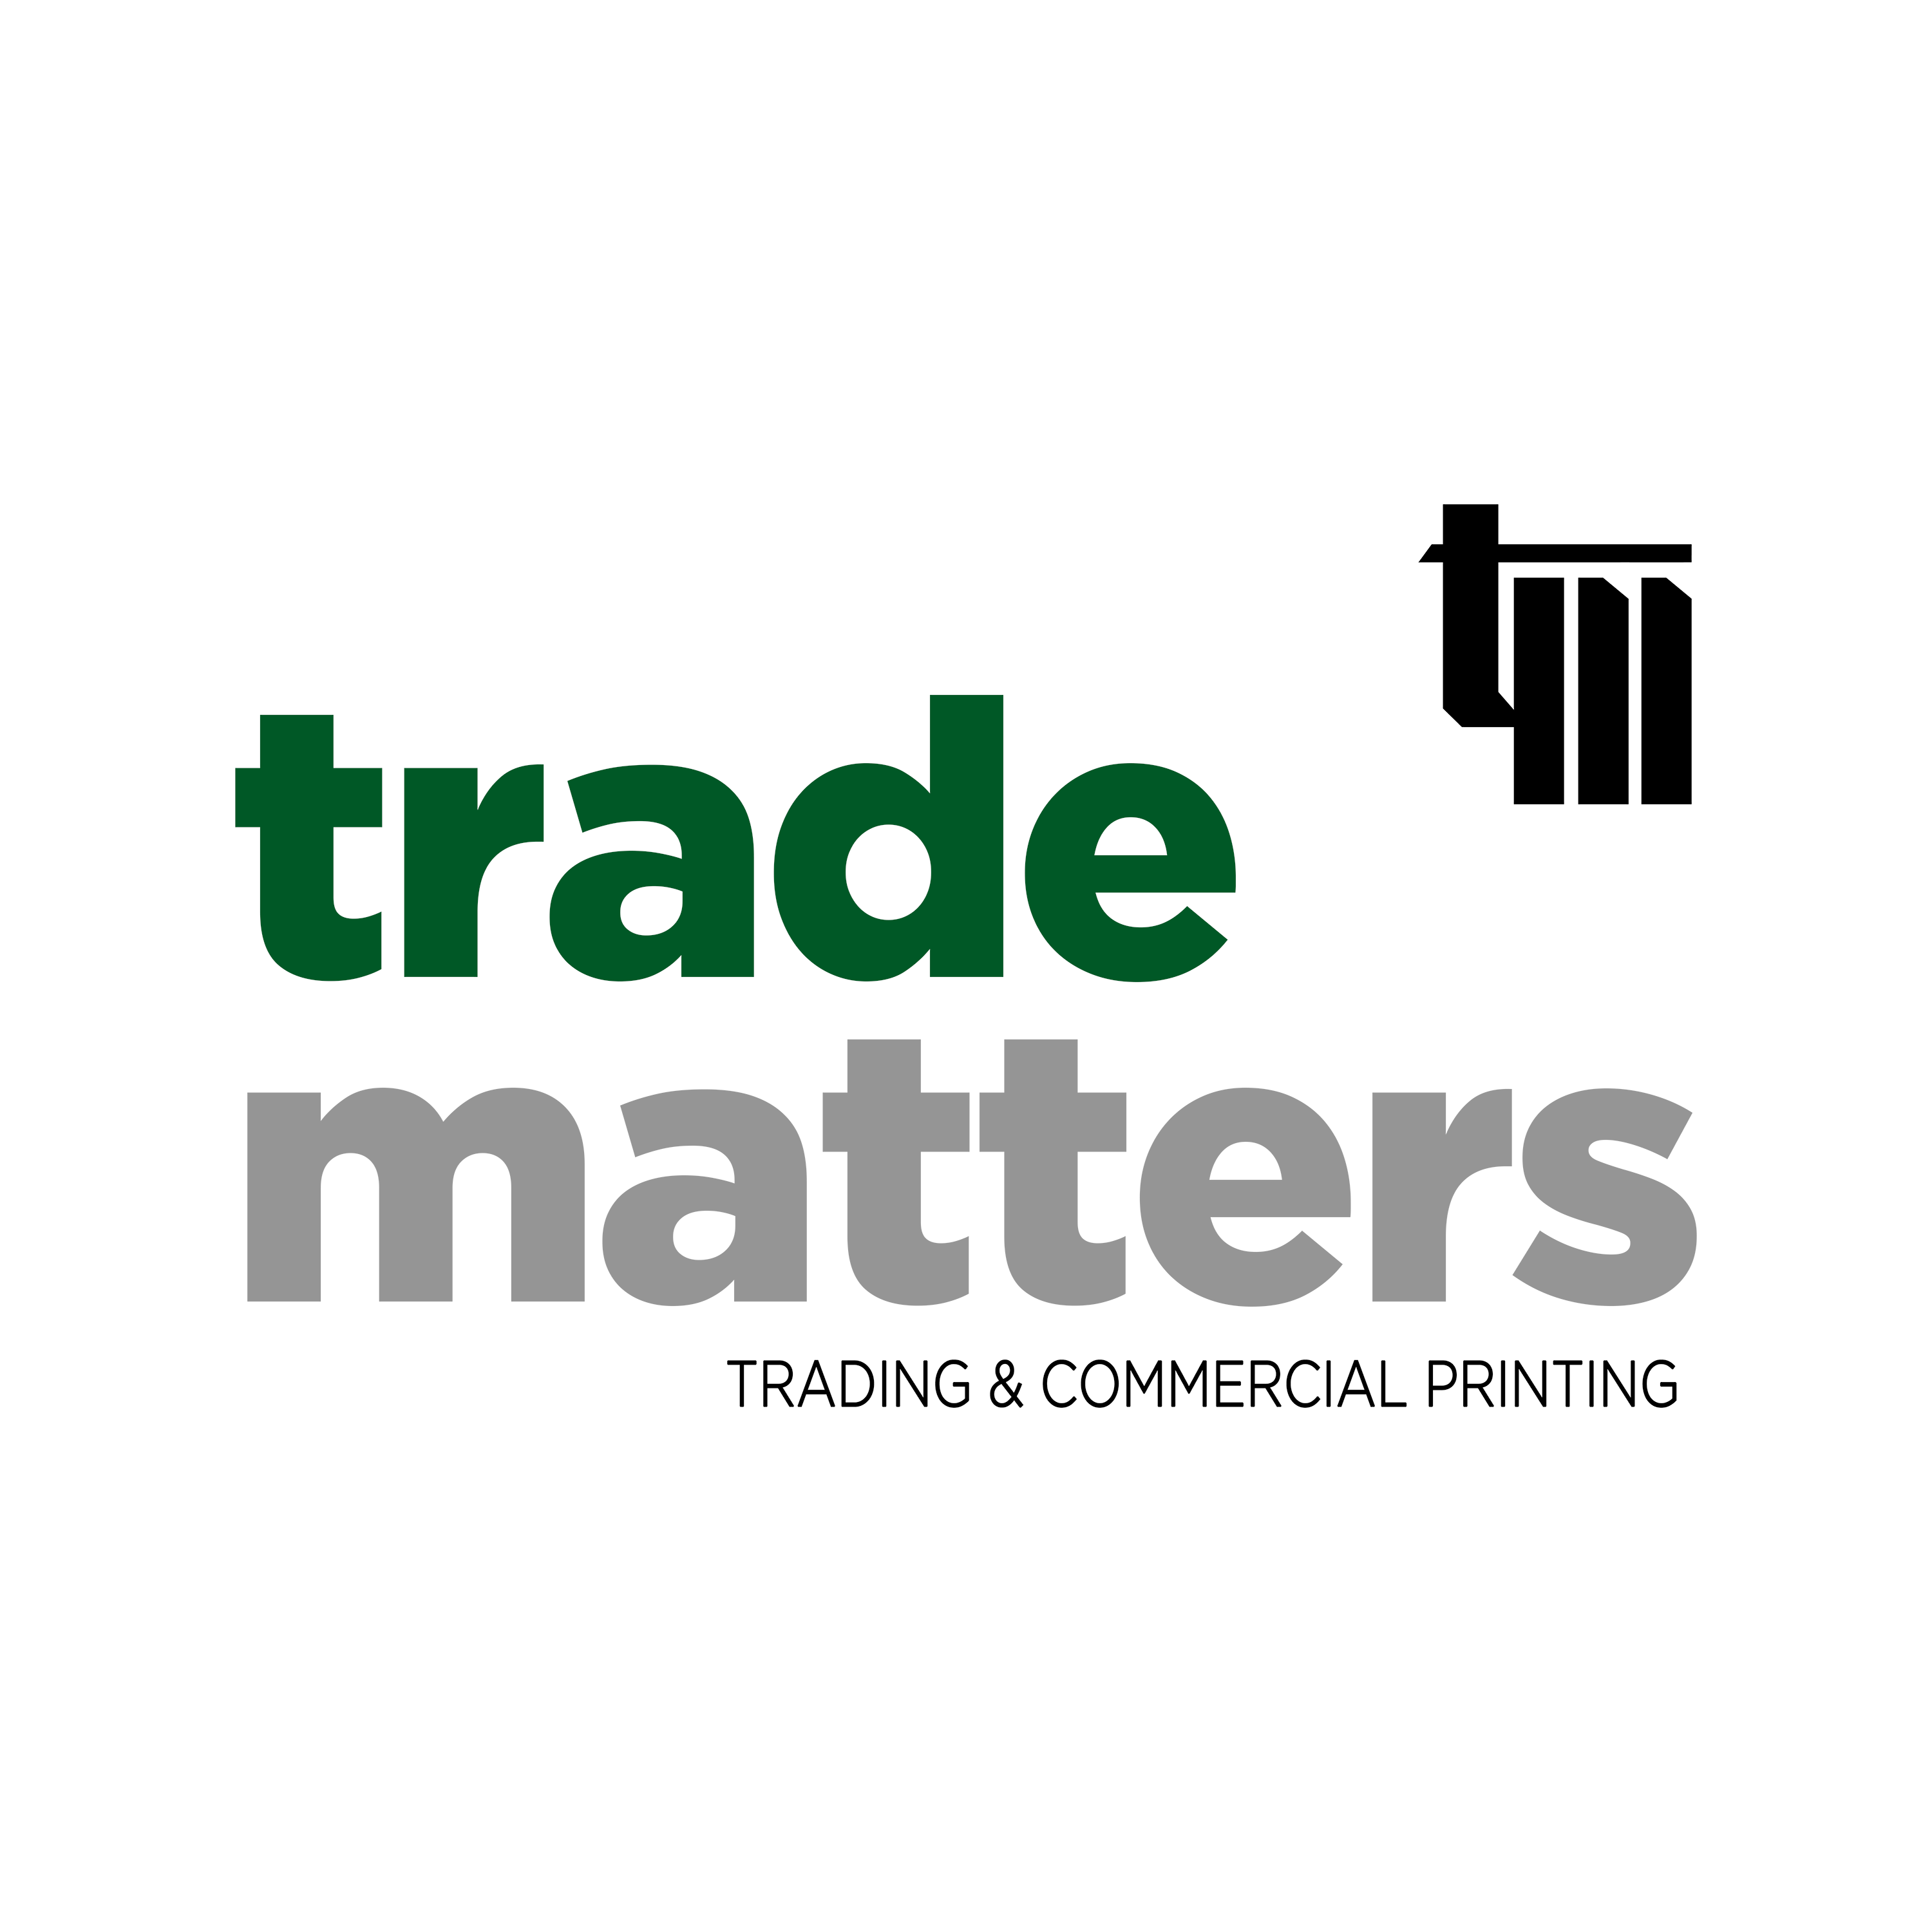 Trade Matters Trading & Commercial Printing